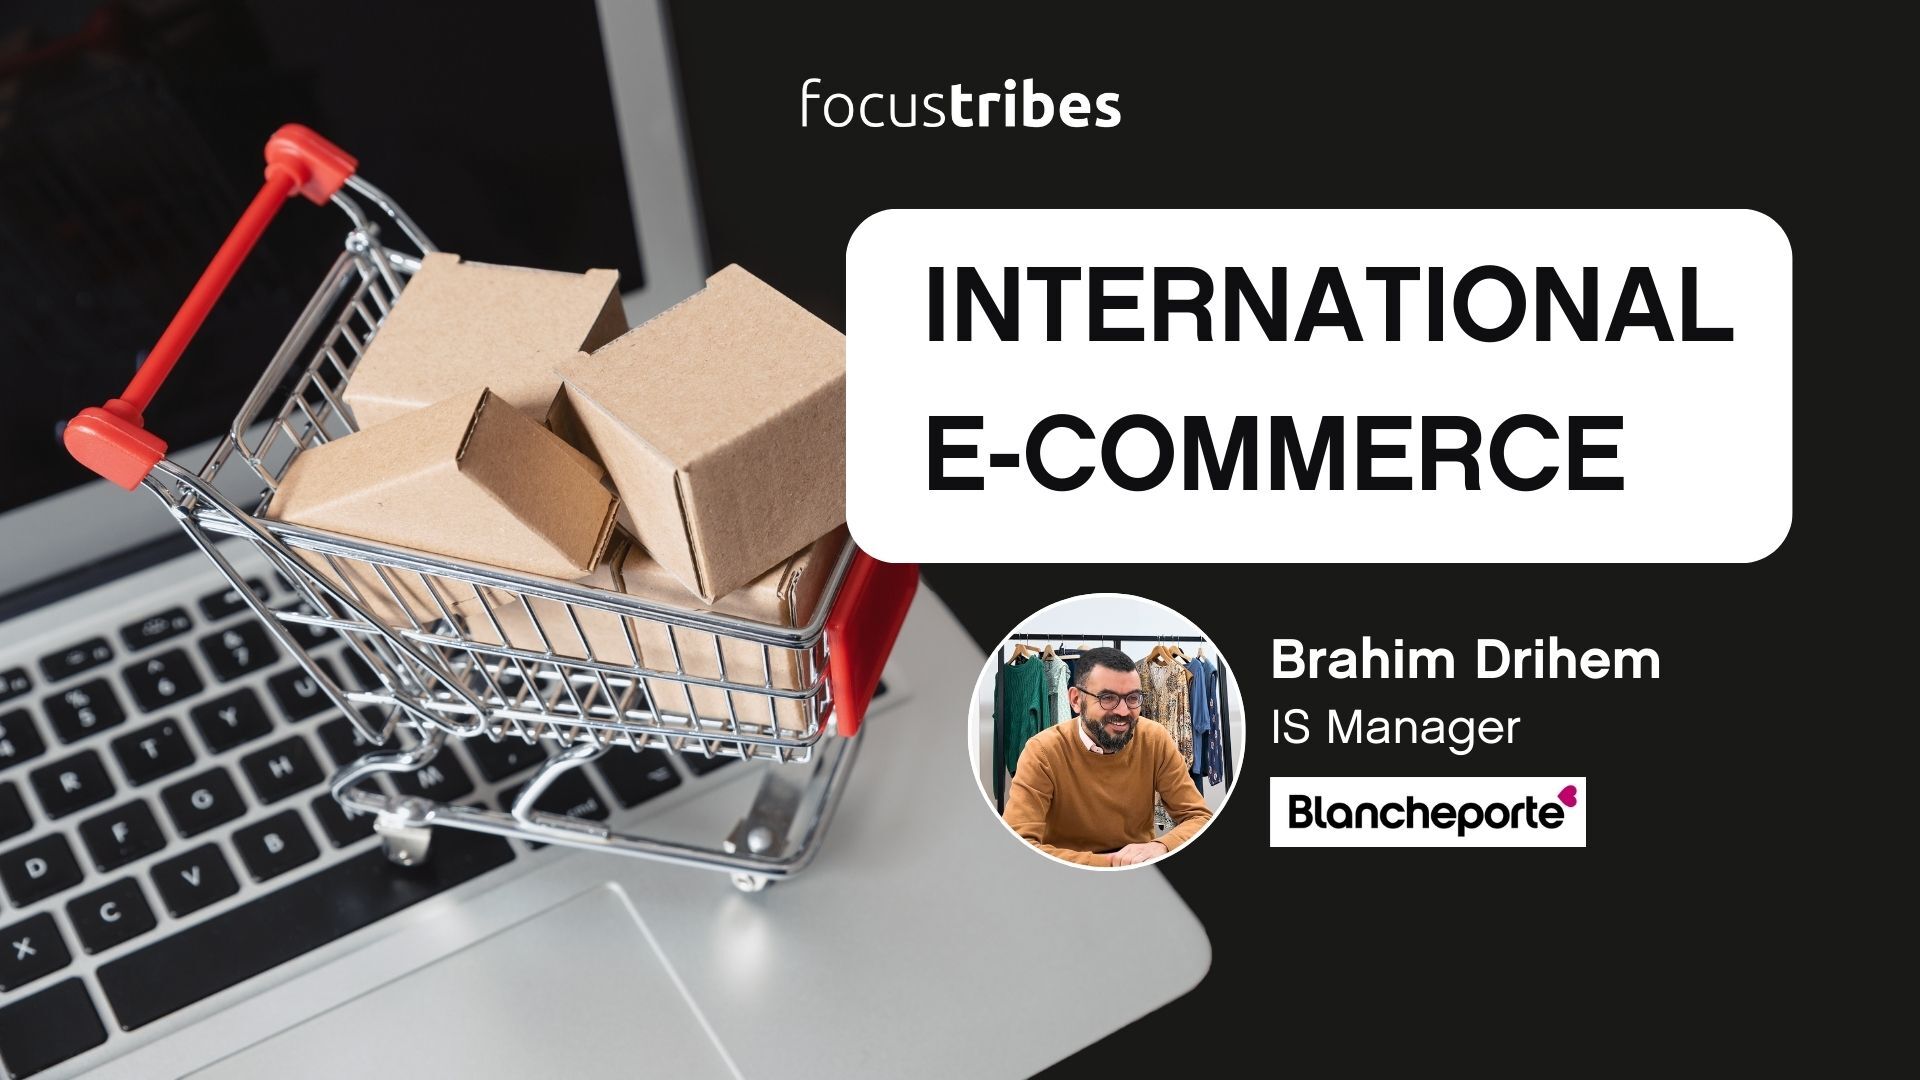 International expansion in e-commerce: client feedback